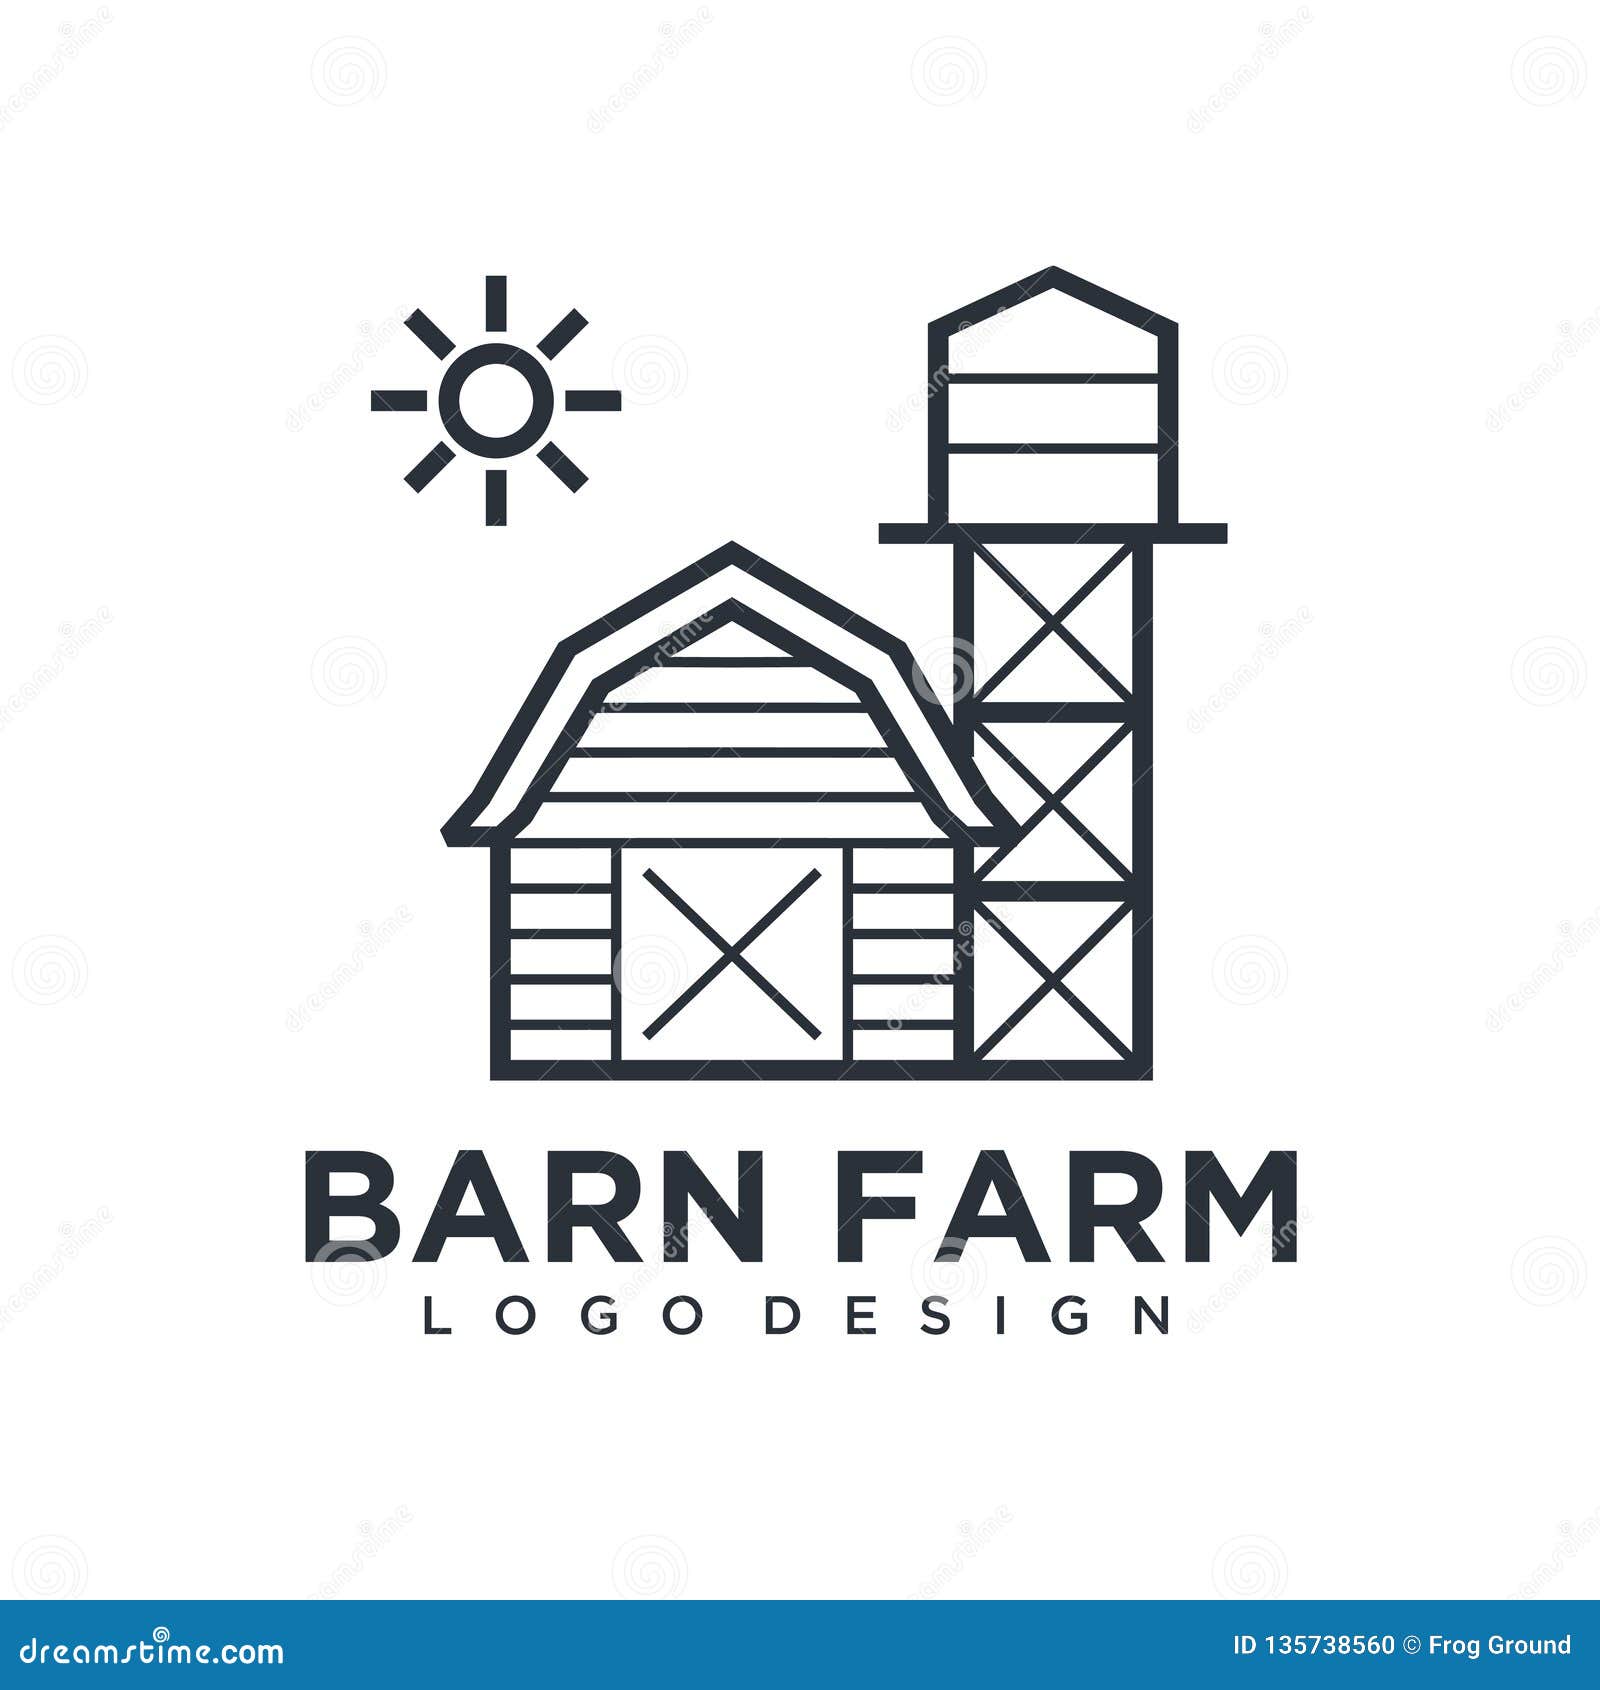 beautiful farmhouse merged with tree | Logo Template by LogoDesign.net